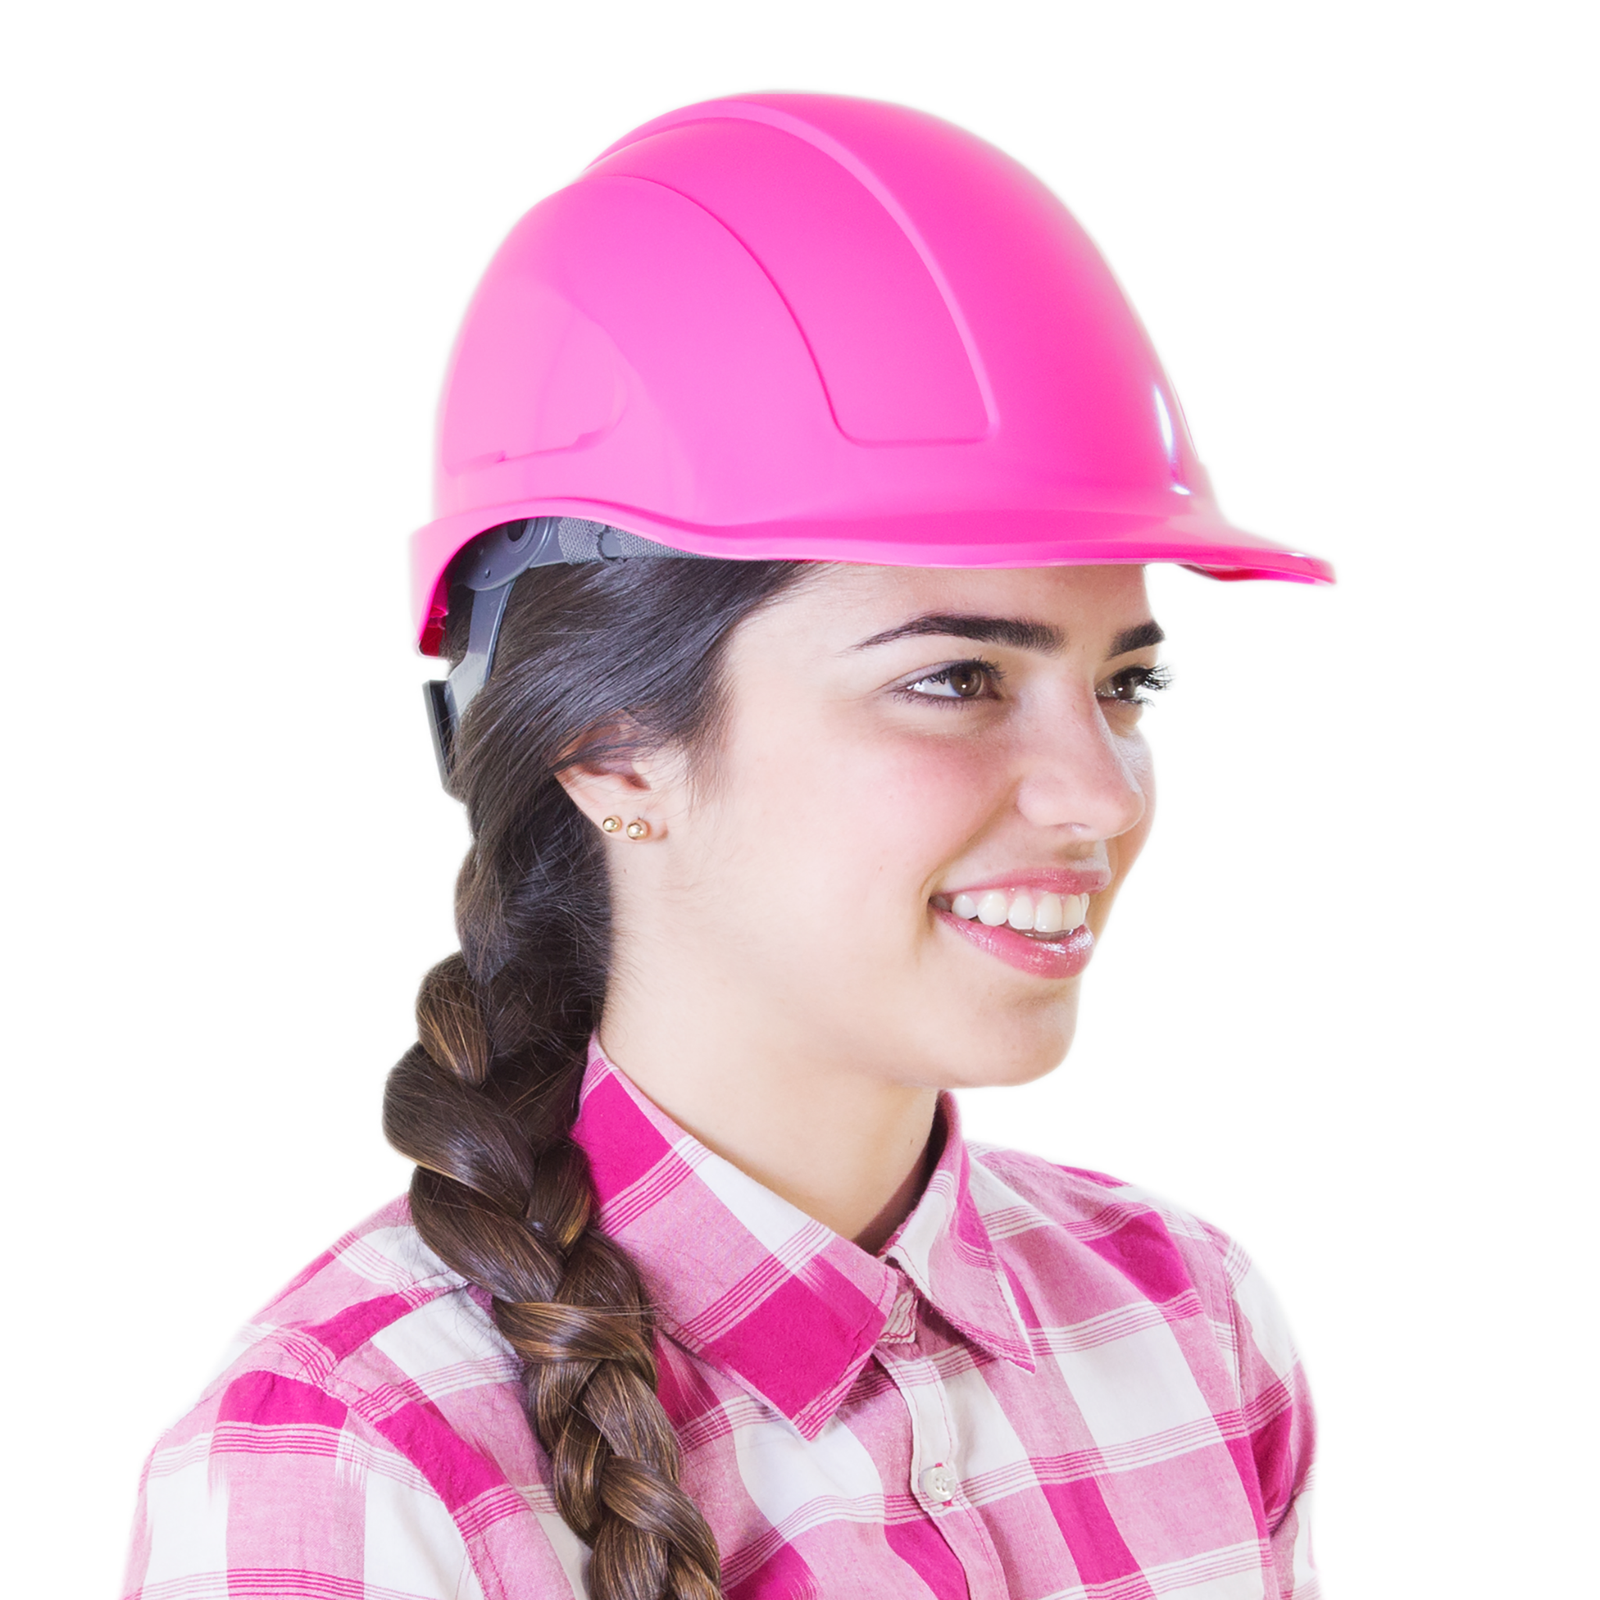 A lady wearing the pink cap style safety hard hat